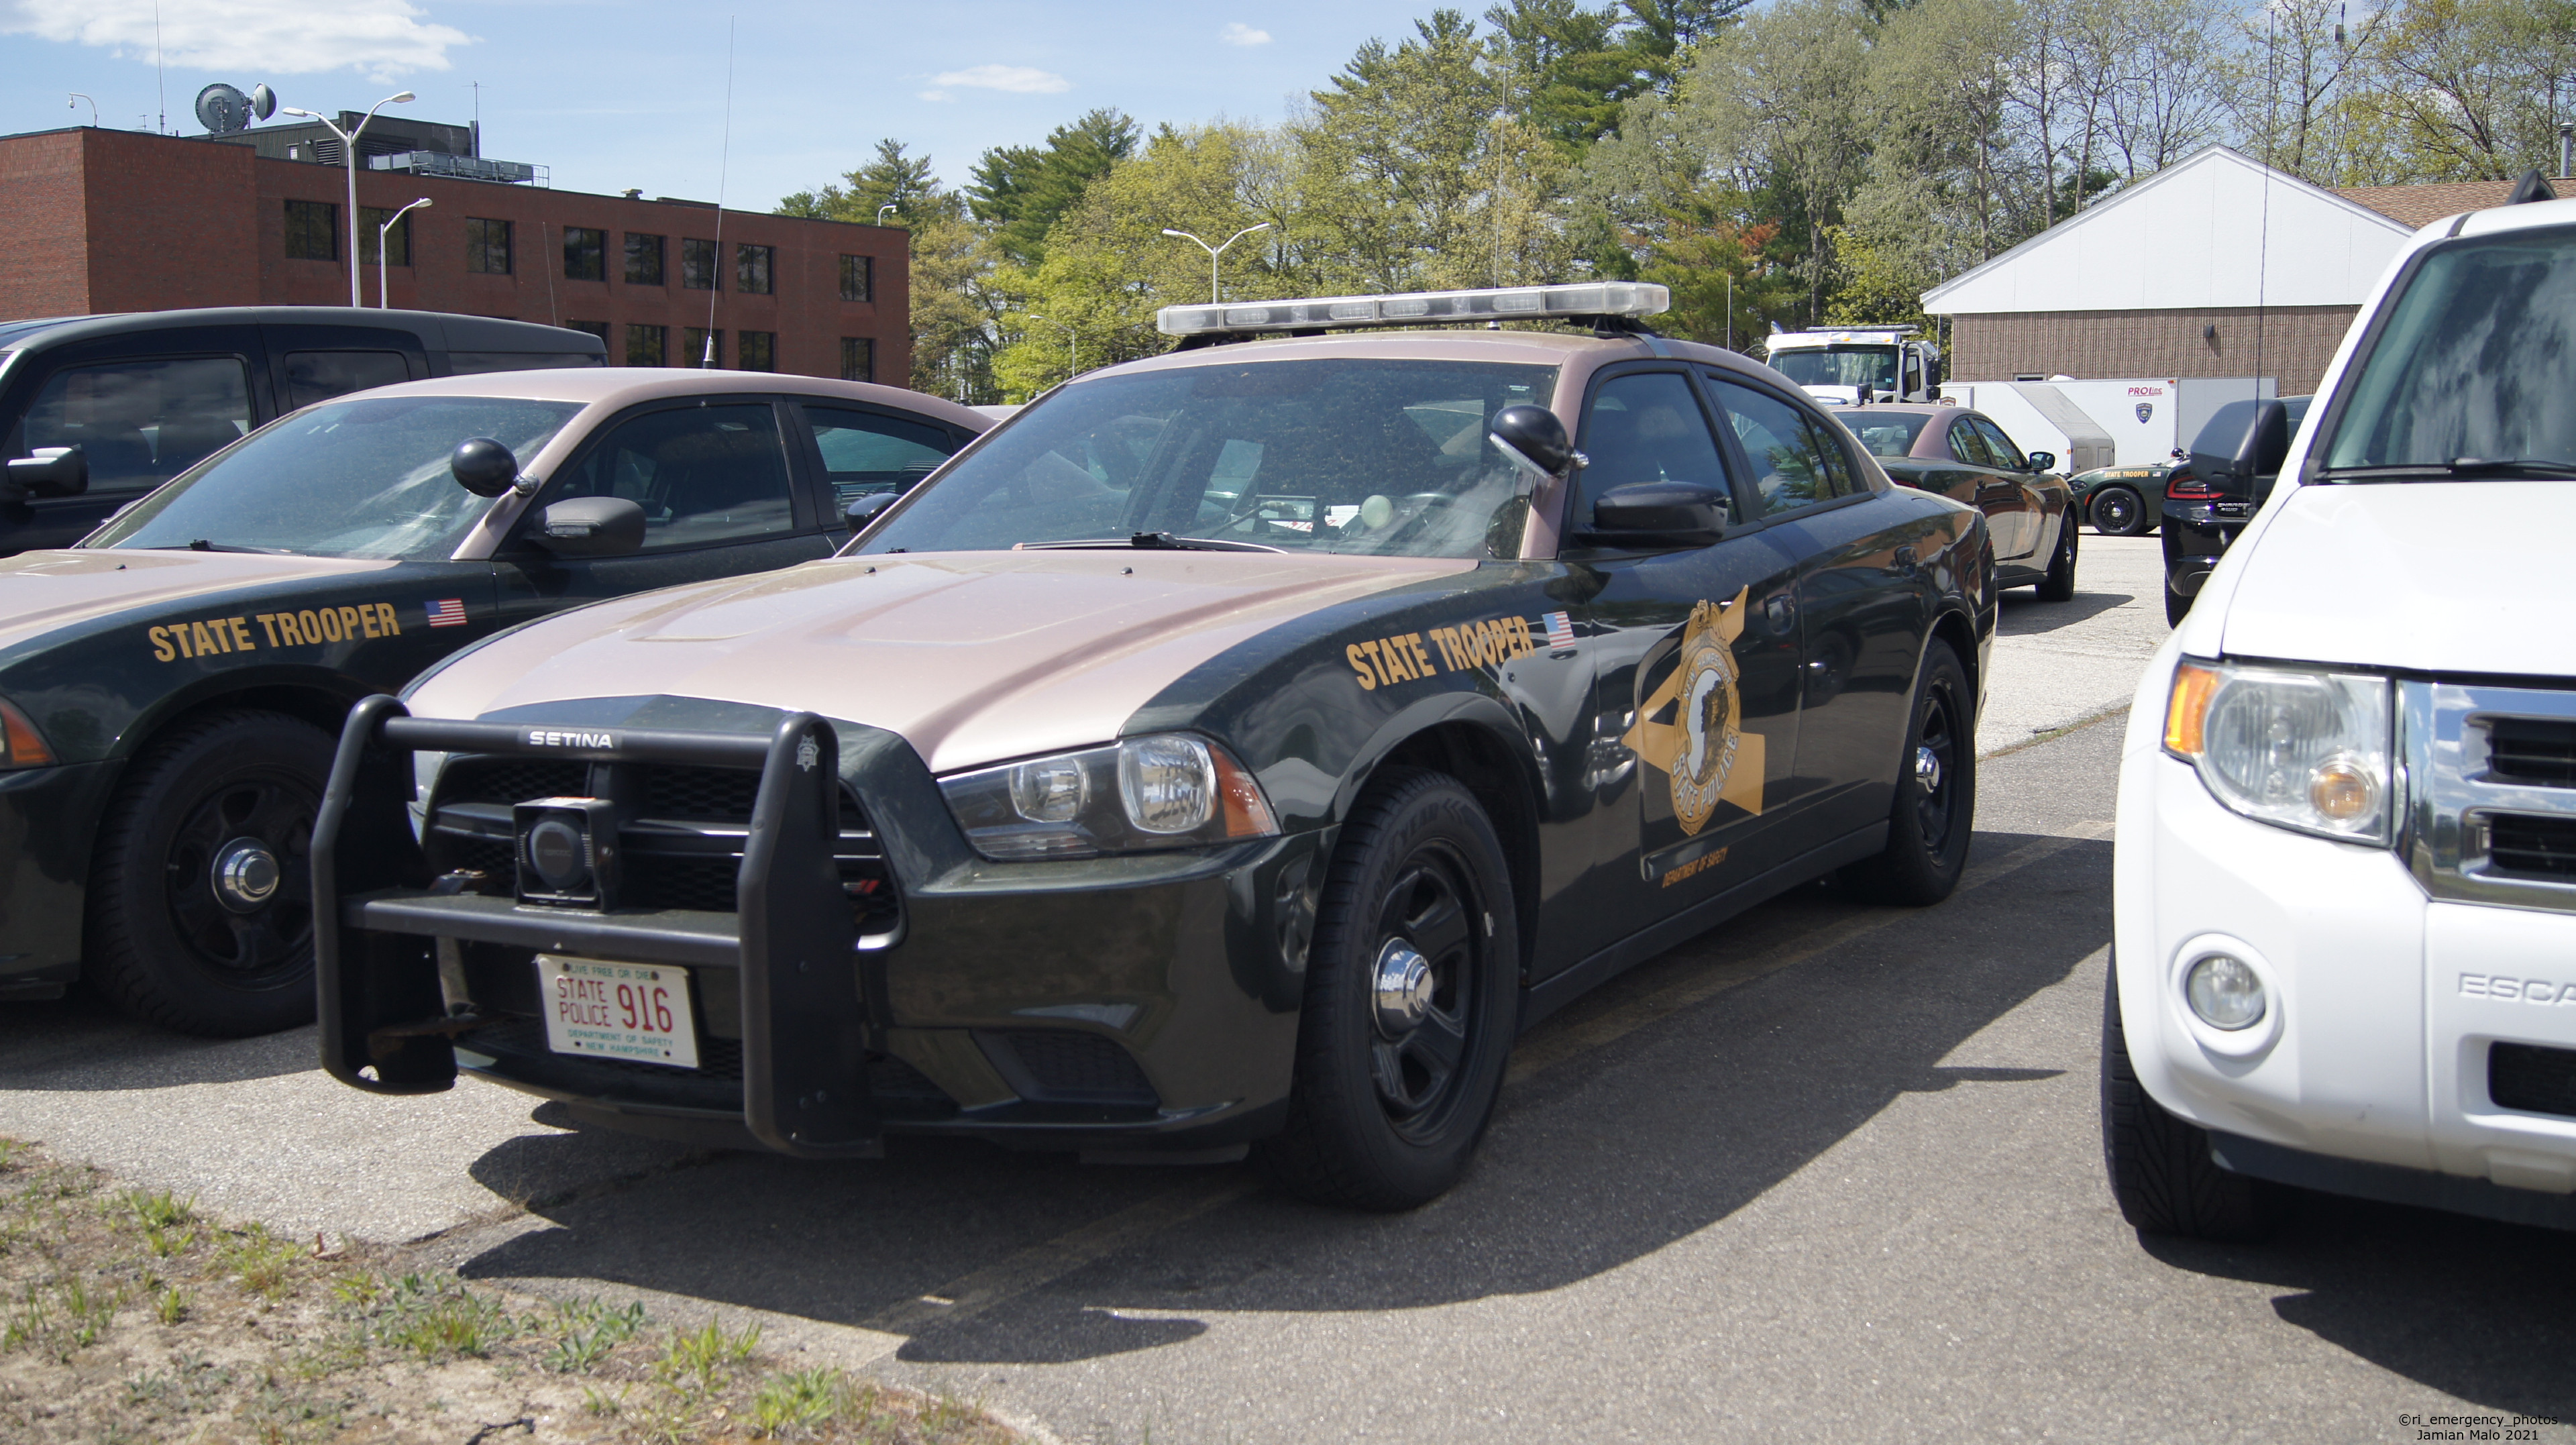 A photo  of New Hampshire State Police
            Cruiser 916, a 2011-2014 Dodge Charger             taken by Jamian Malo